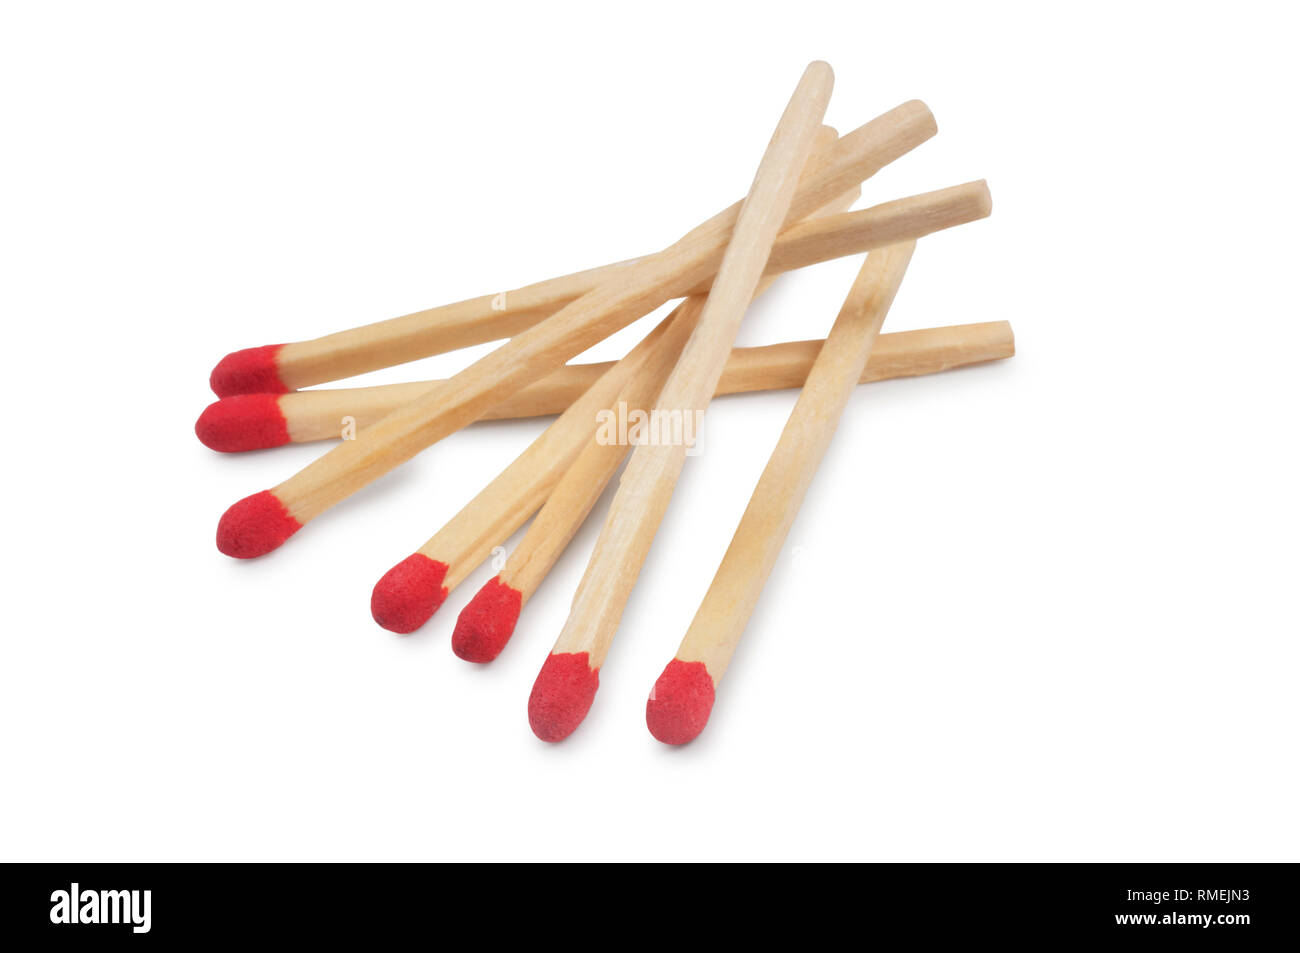 Studio shot of unlit matches isolated on a white background - John Gollop Stock Photo